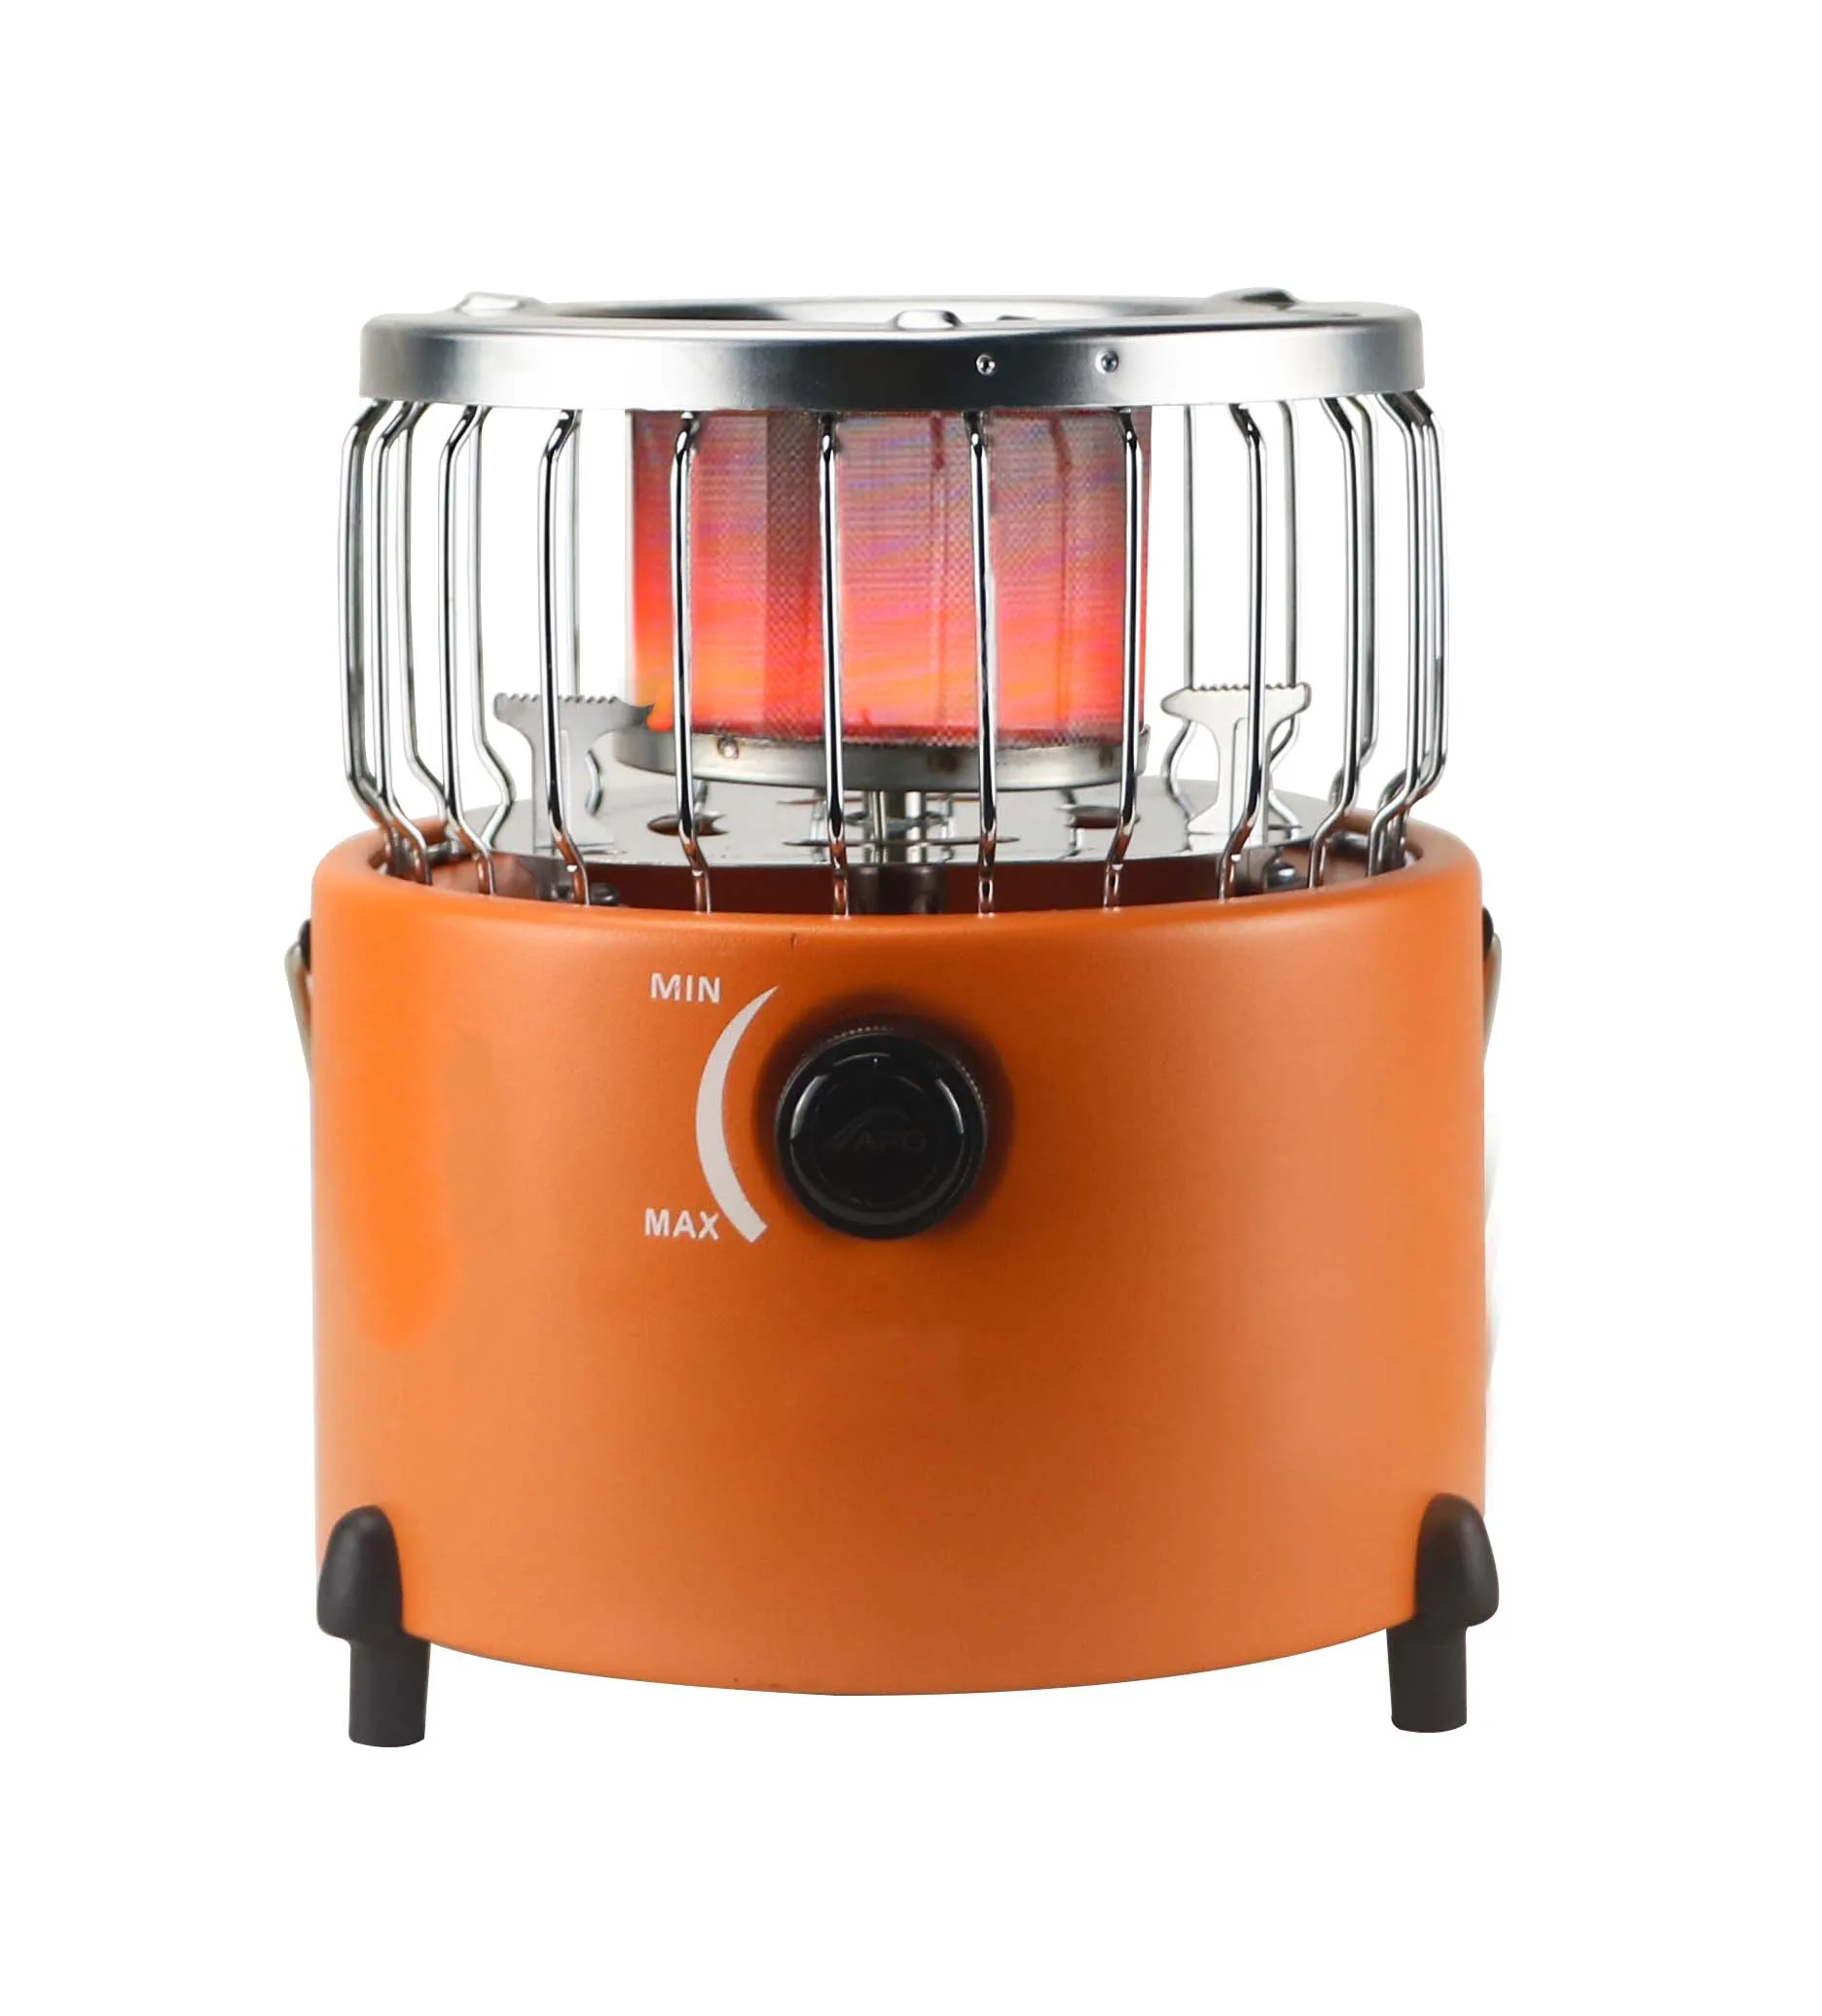 Propane Heater Camping Portable 2 In 1 Outdoor Gas Heater & Stove Included Te 